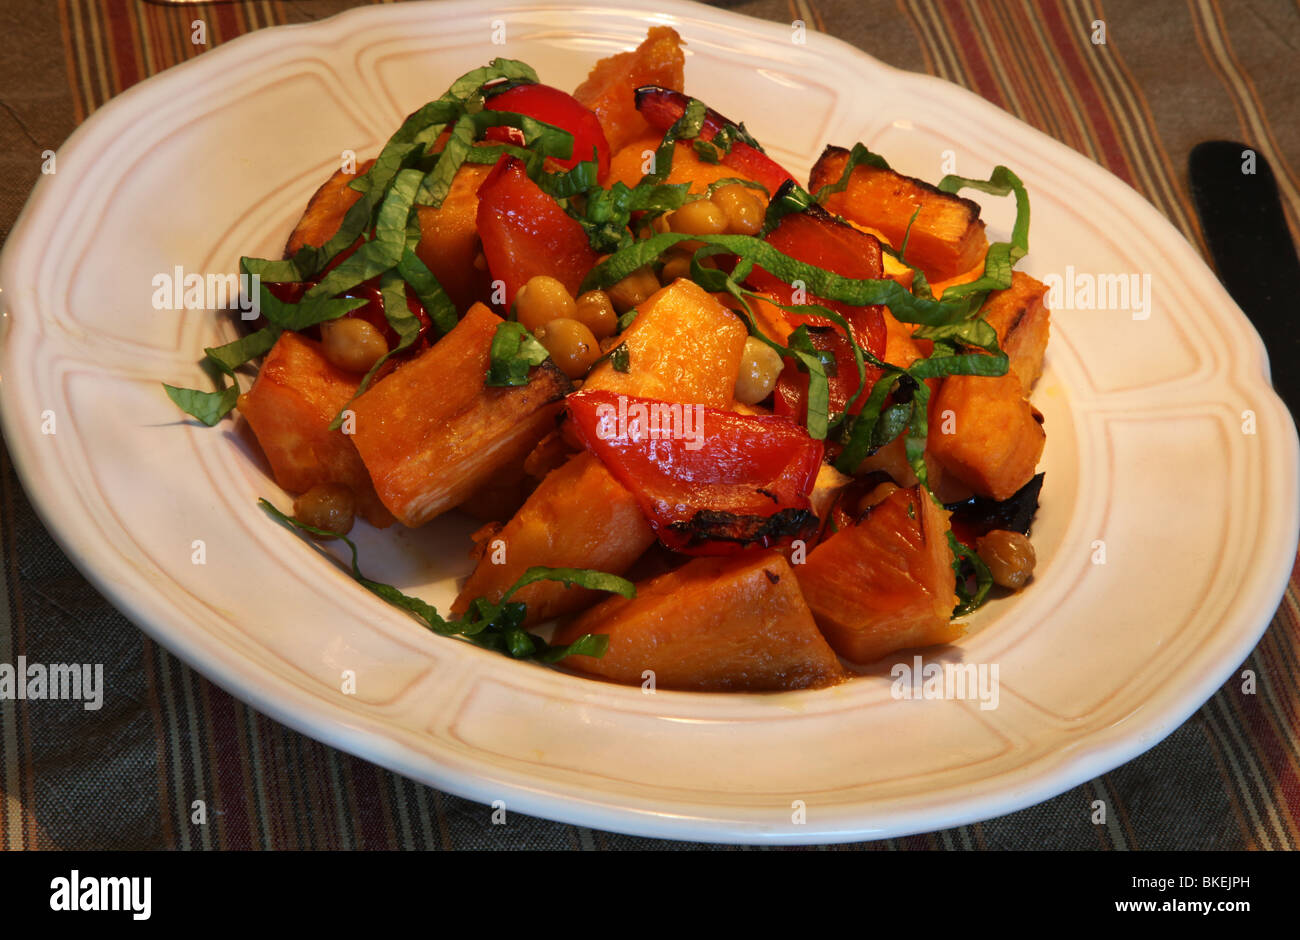 Baked dish of sweet potatoes, red peppers, chick peas and spinach Stock Photo